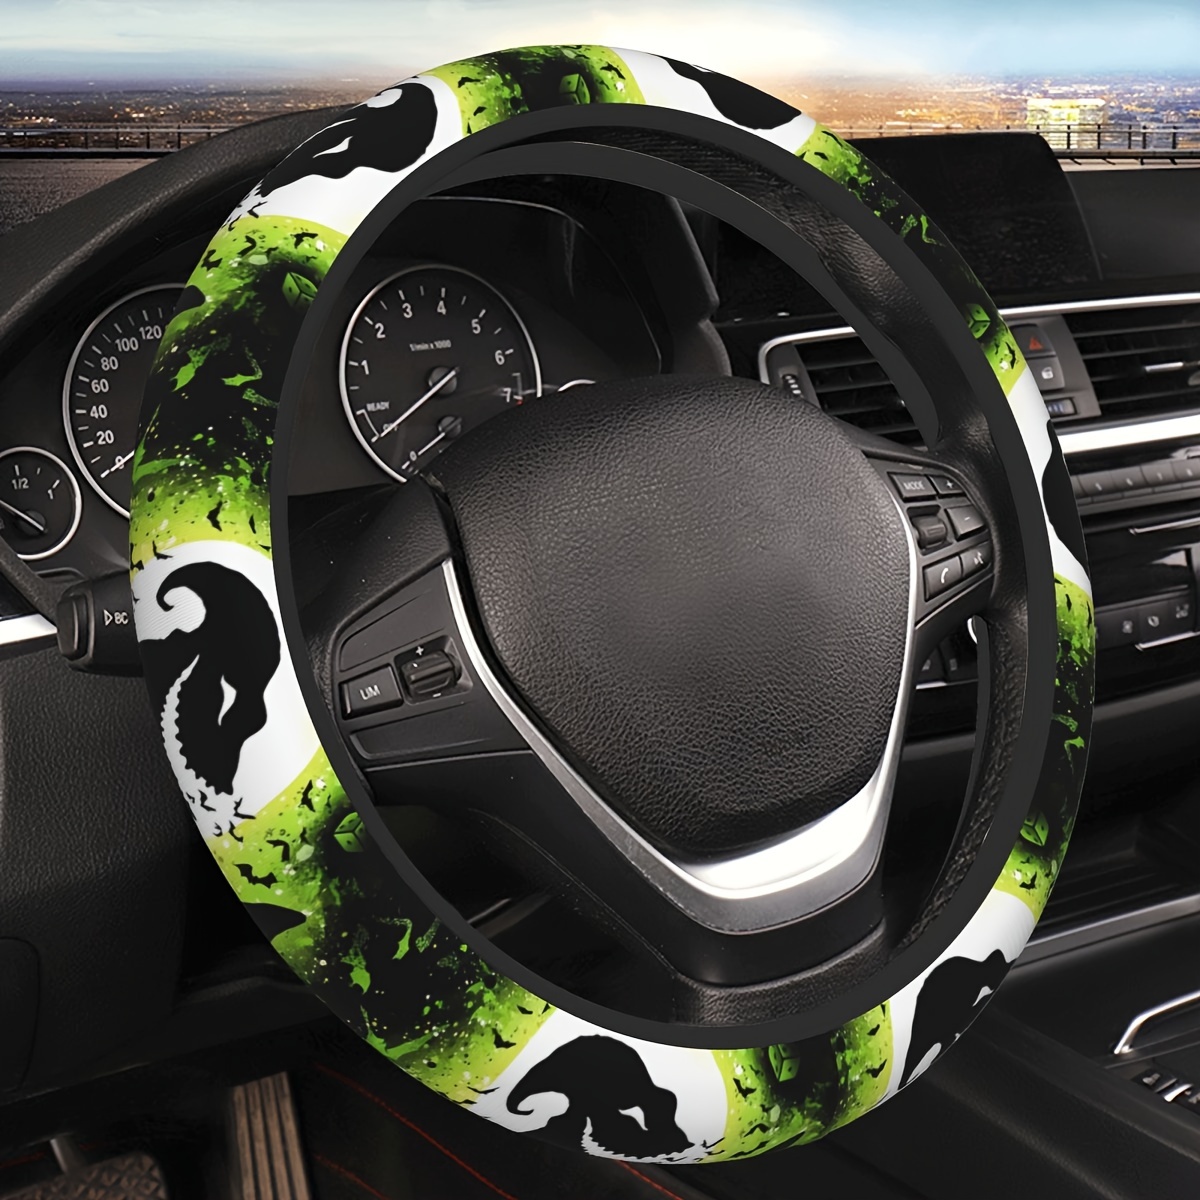 

Anime Cartoon Horror Ghosts Steering Wheel Cover For Men And Women, Universal 15-inch Neoprene Non-slip Car Steering Wheel Protector Accessory Without Inner Circle